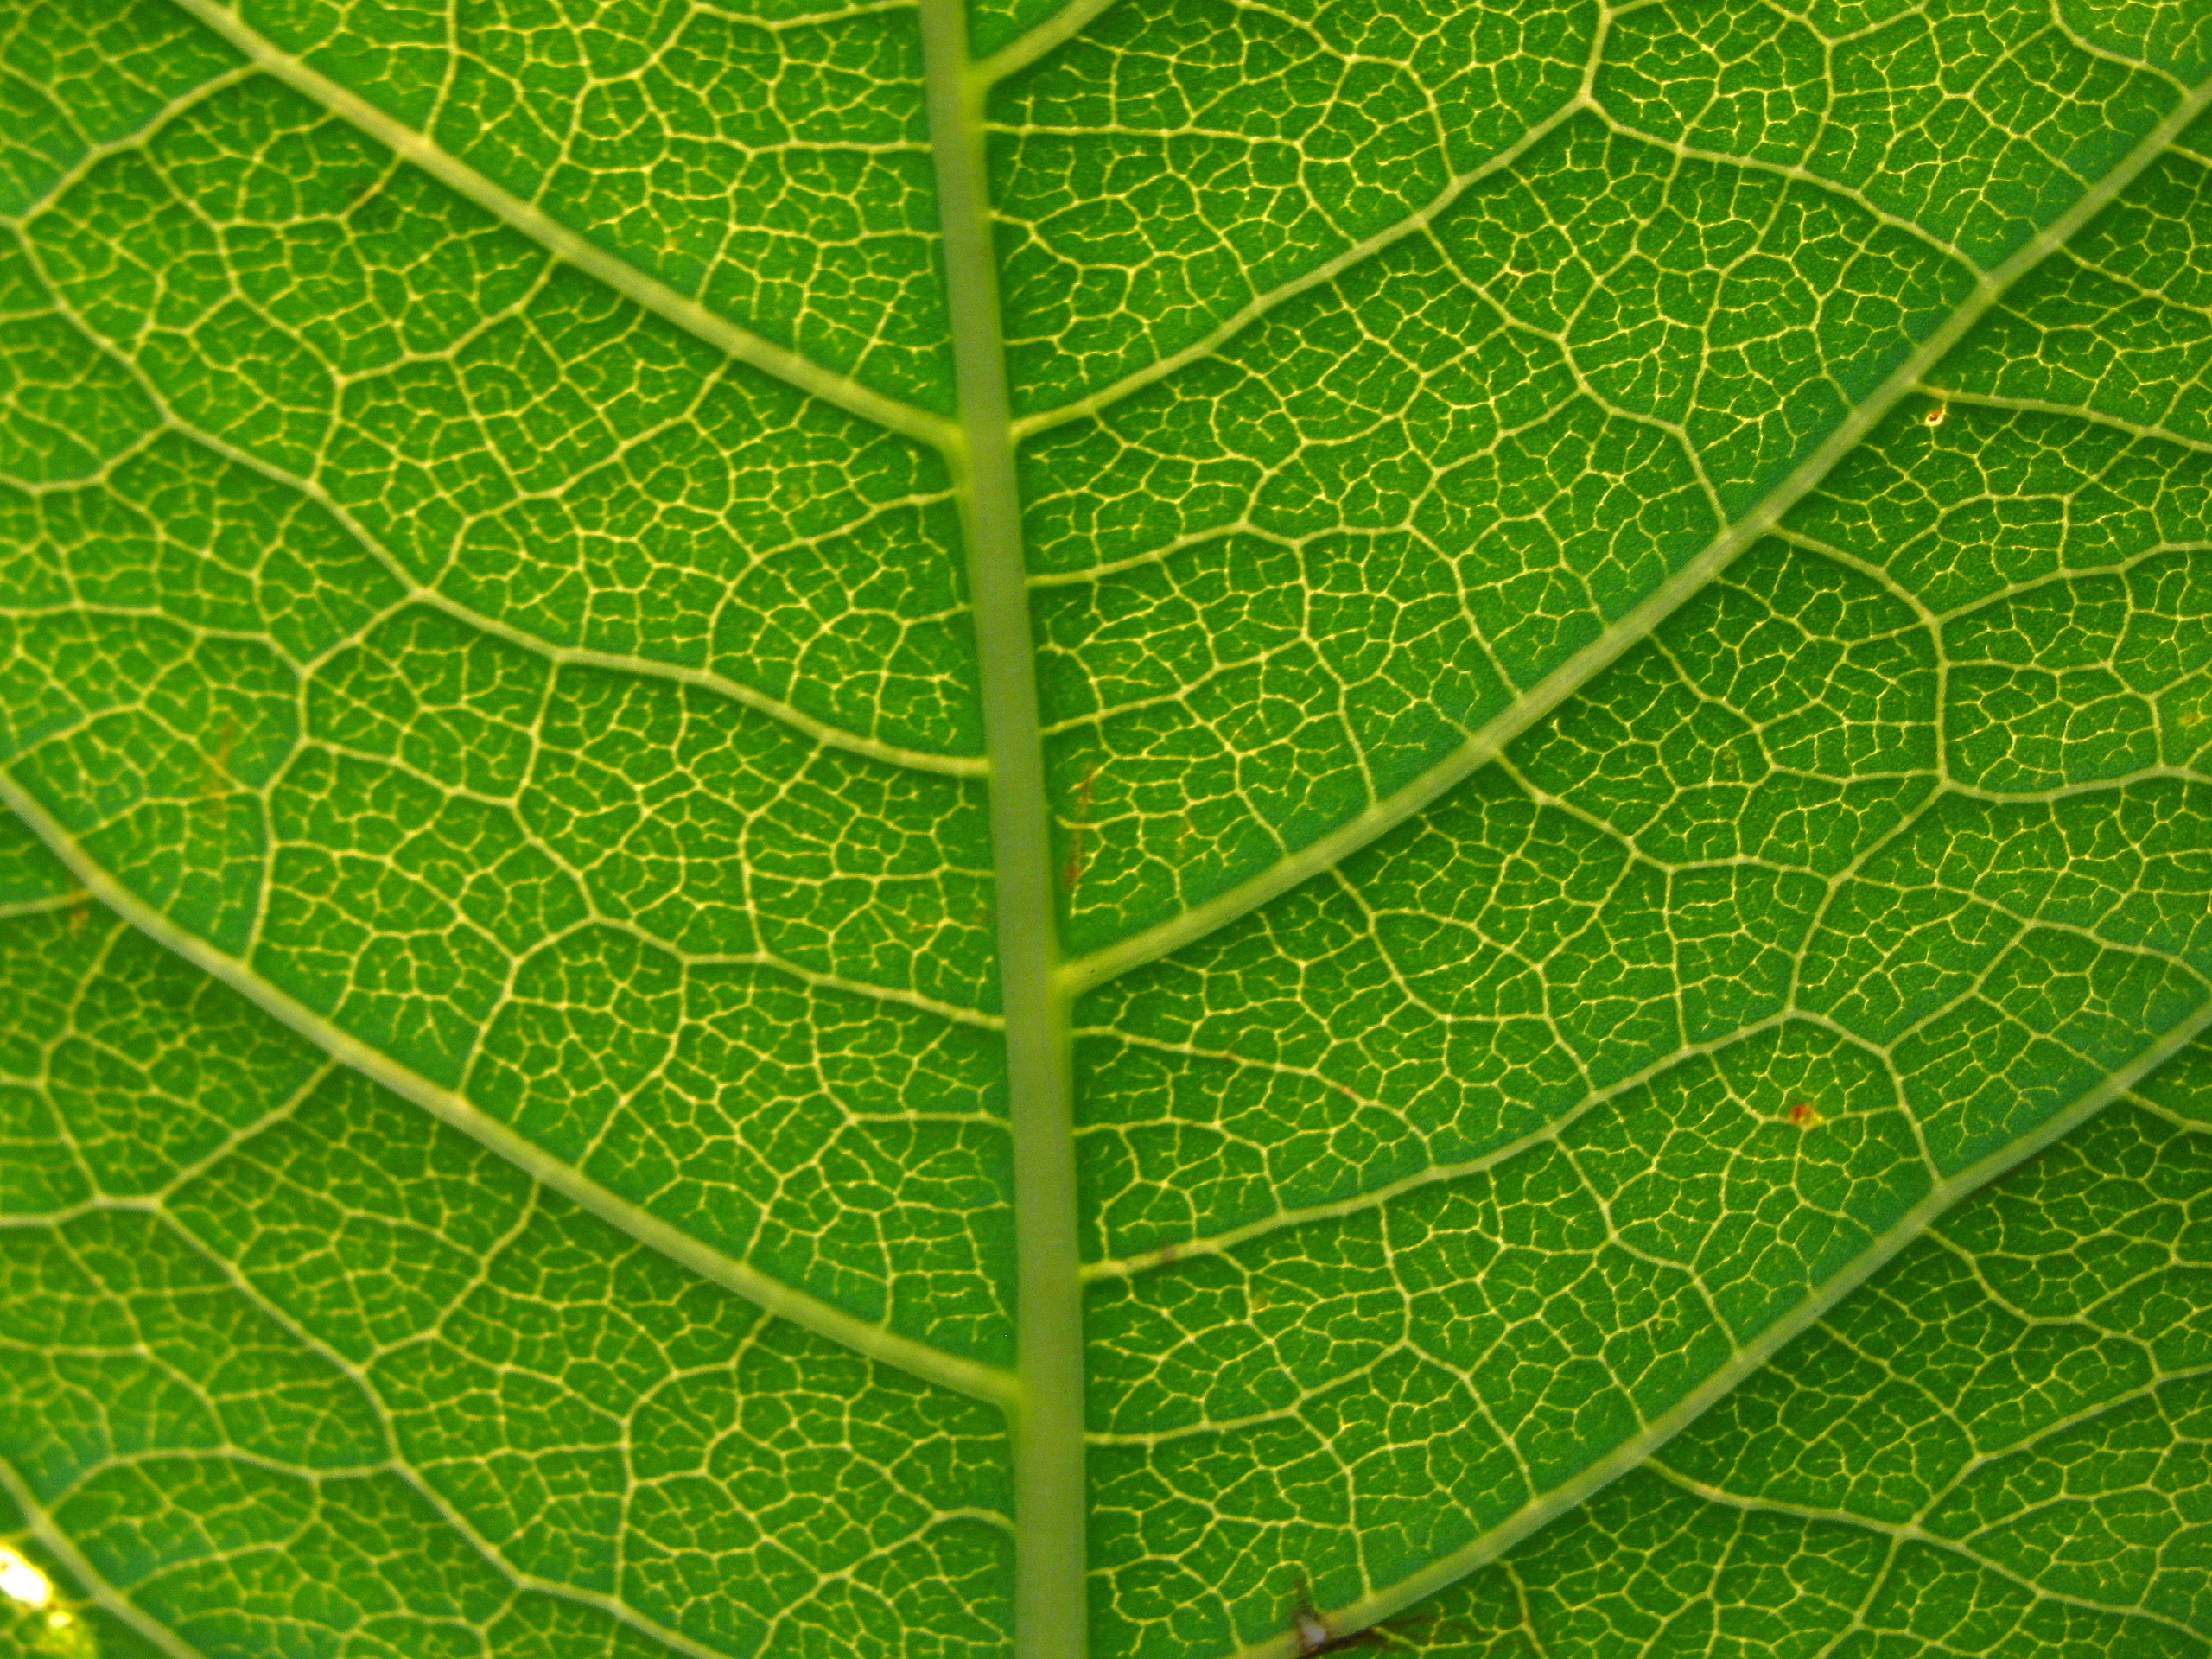 Green leaf close-up - Green Photo (23162757) - Fanpop - Page 11